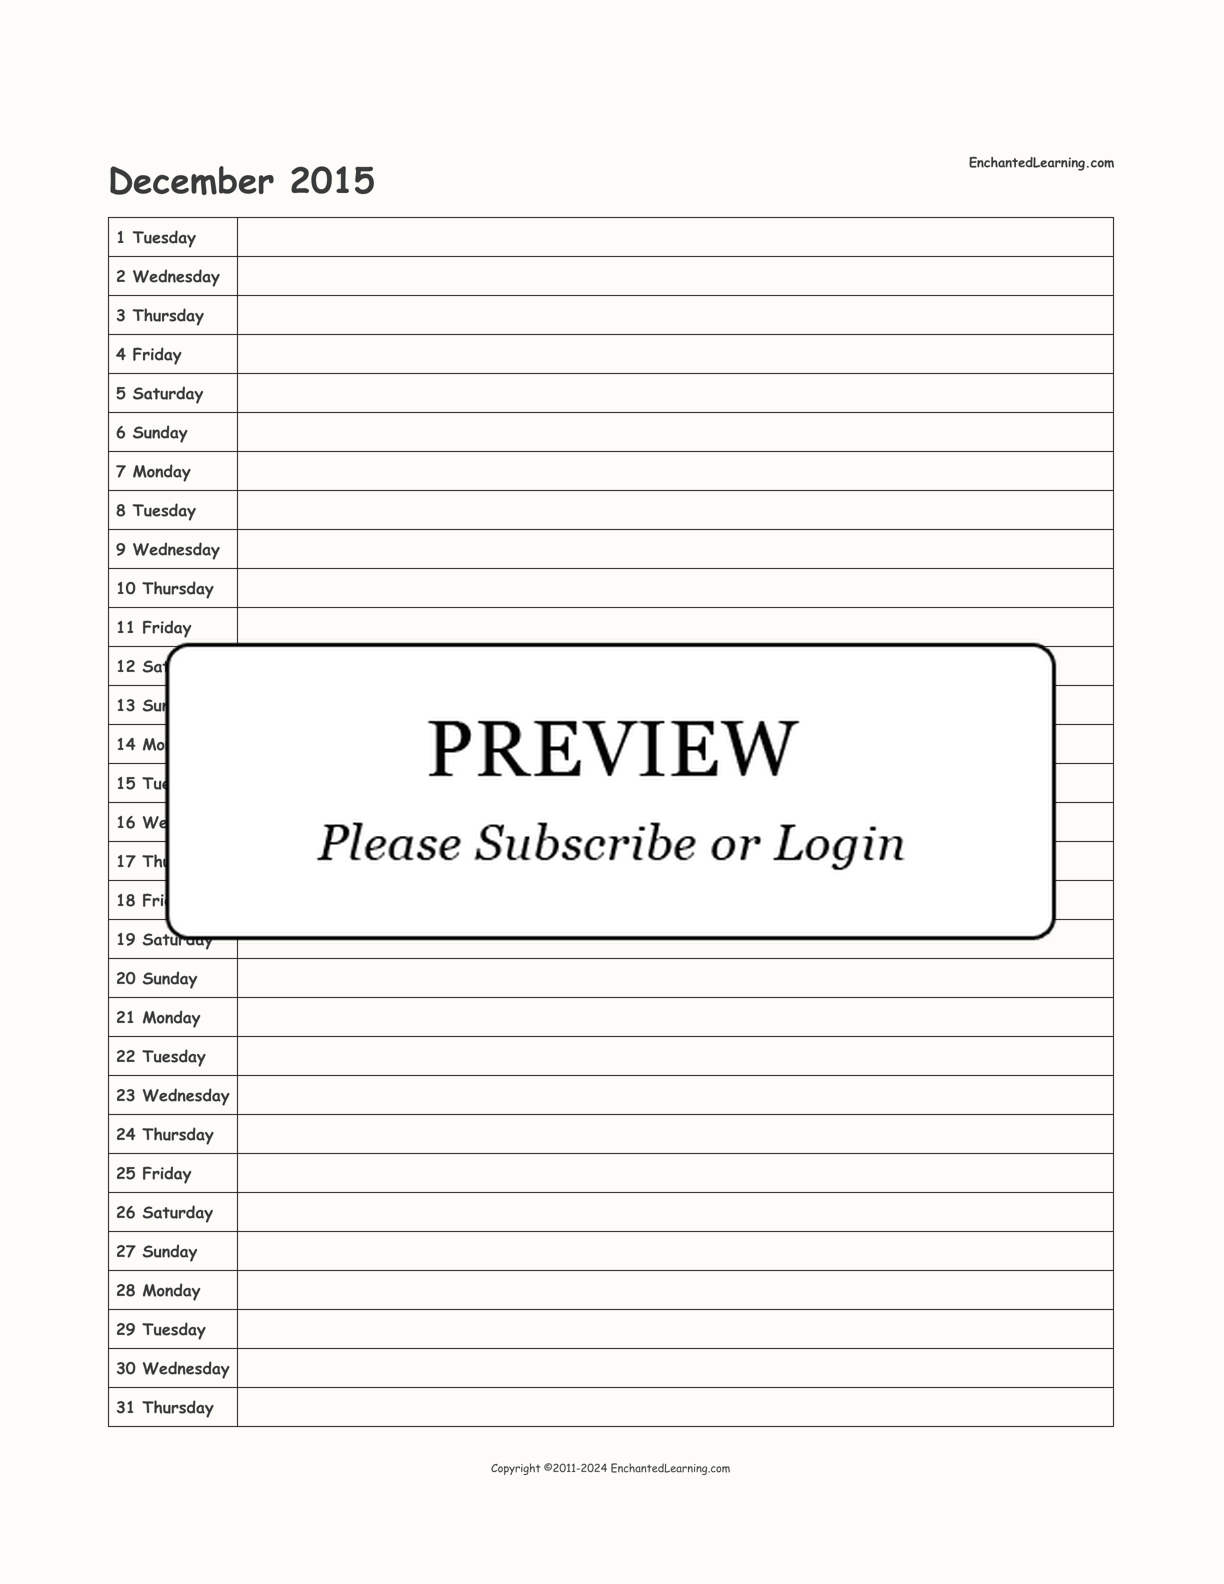 2015 Scheduling Calendar interactive printout page 12